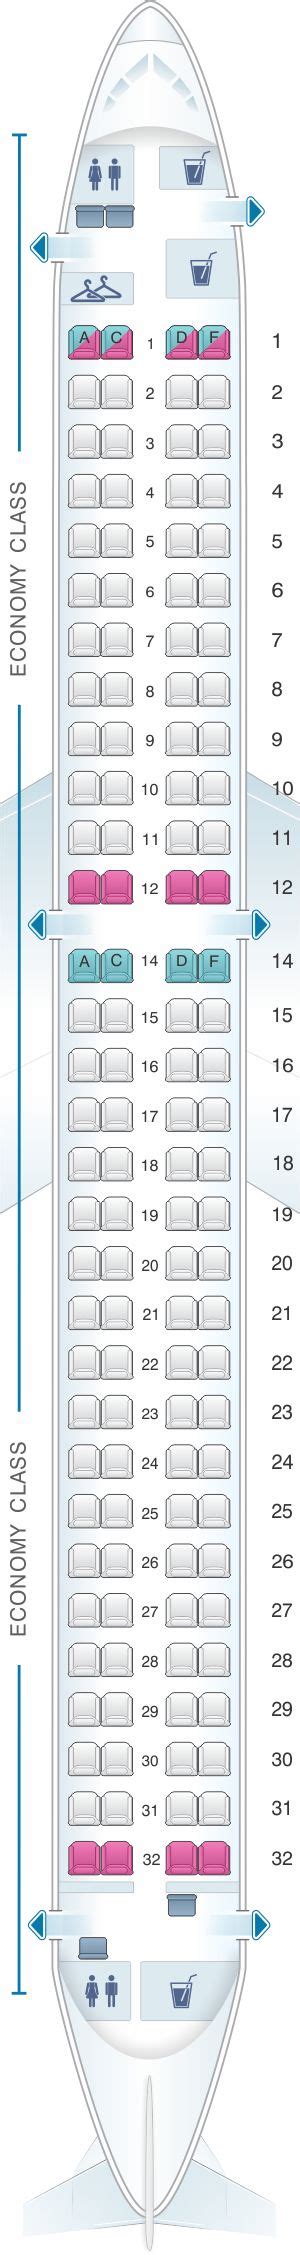 Detailed Seat Map Austrian Airlines Embraer 195 Find The Best